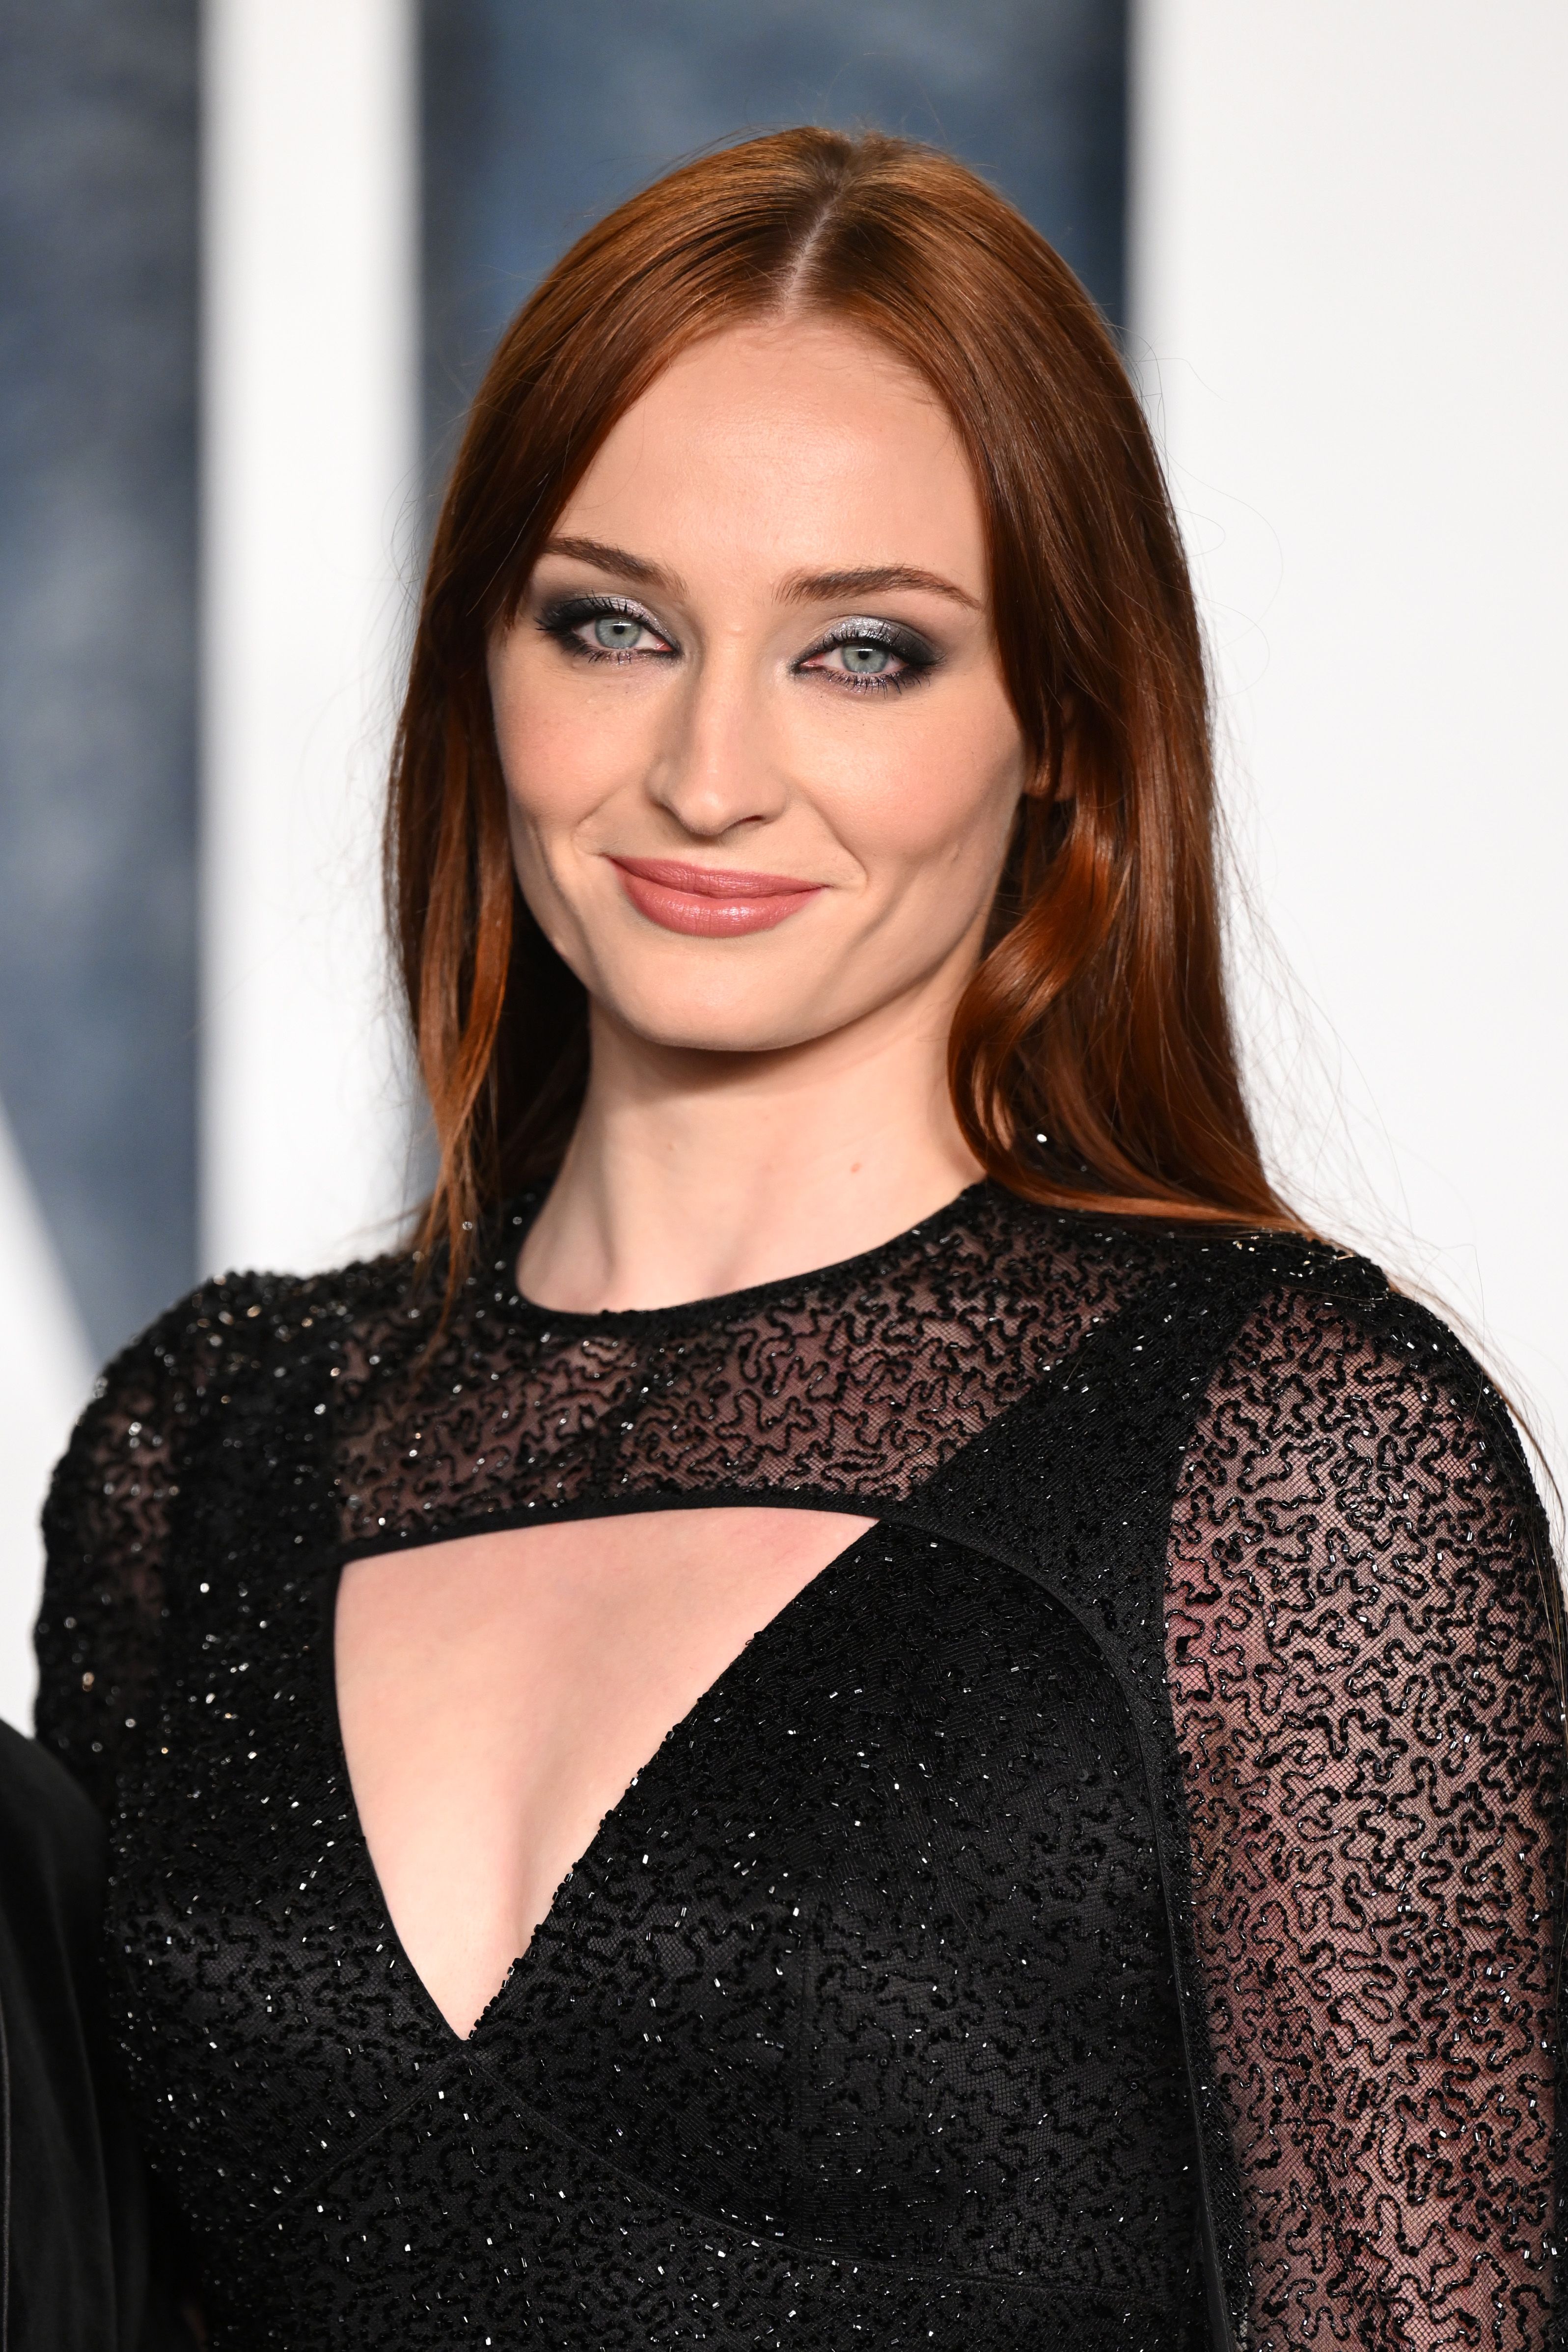 Sophie Turner Dyed Her Hair Back to Red and Sansa Stark Is Reborn